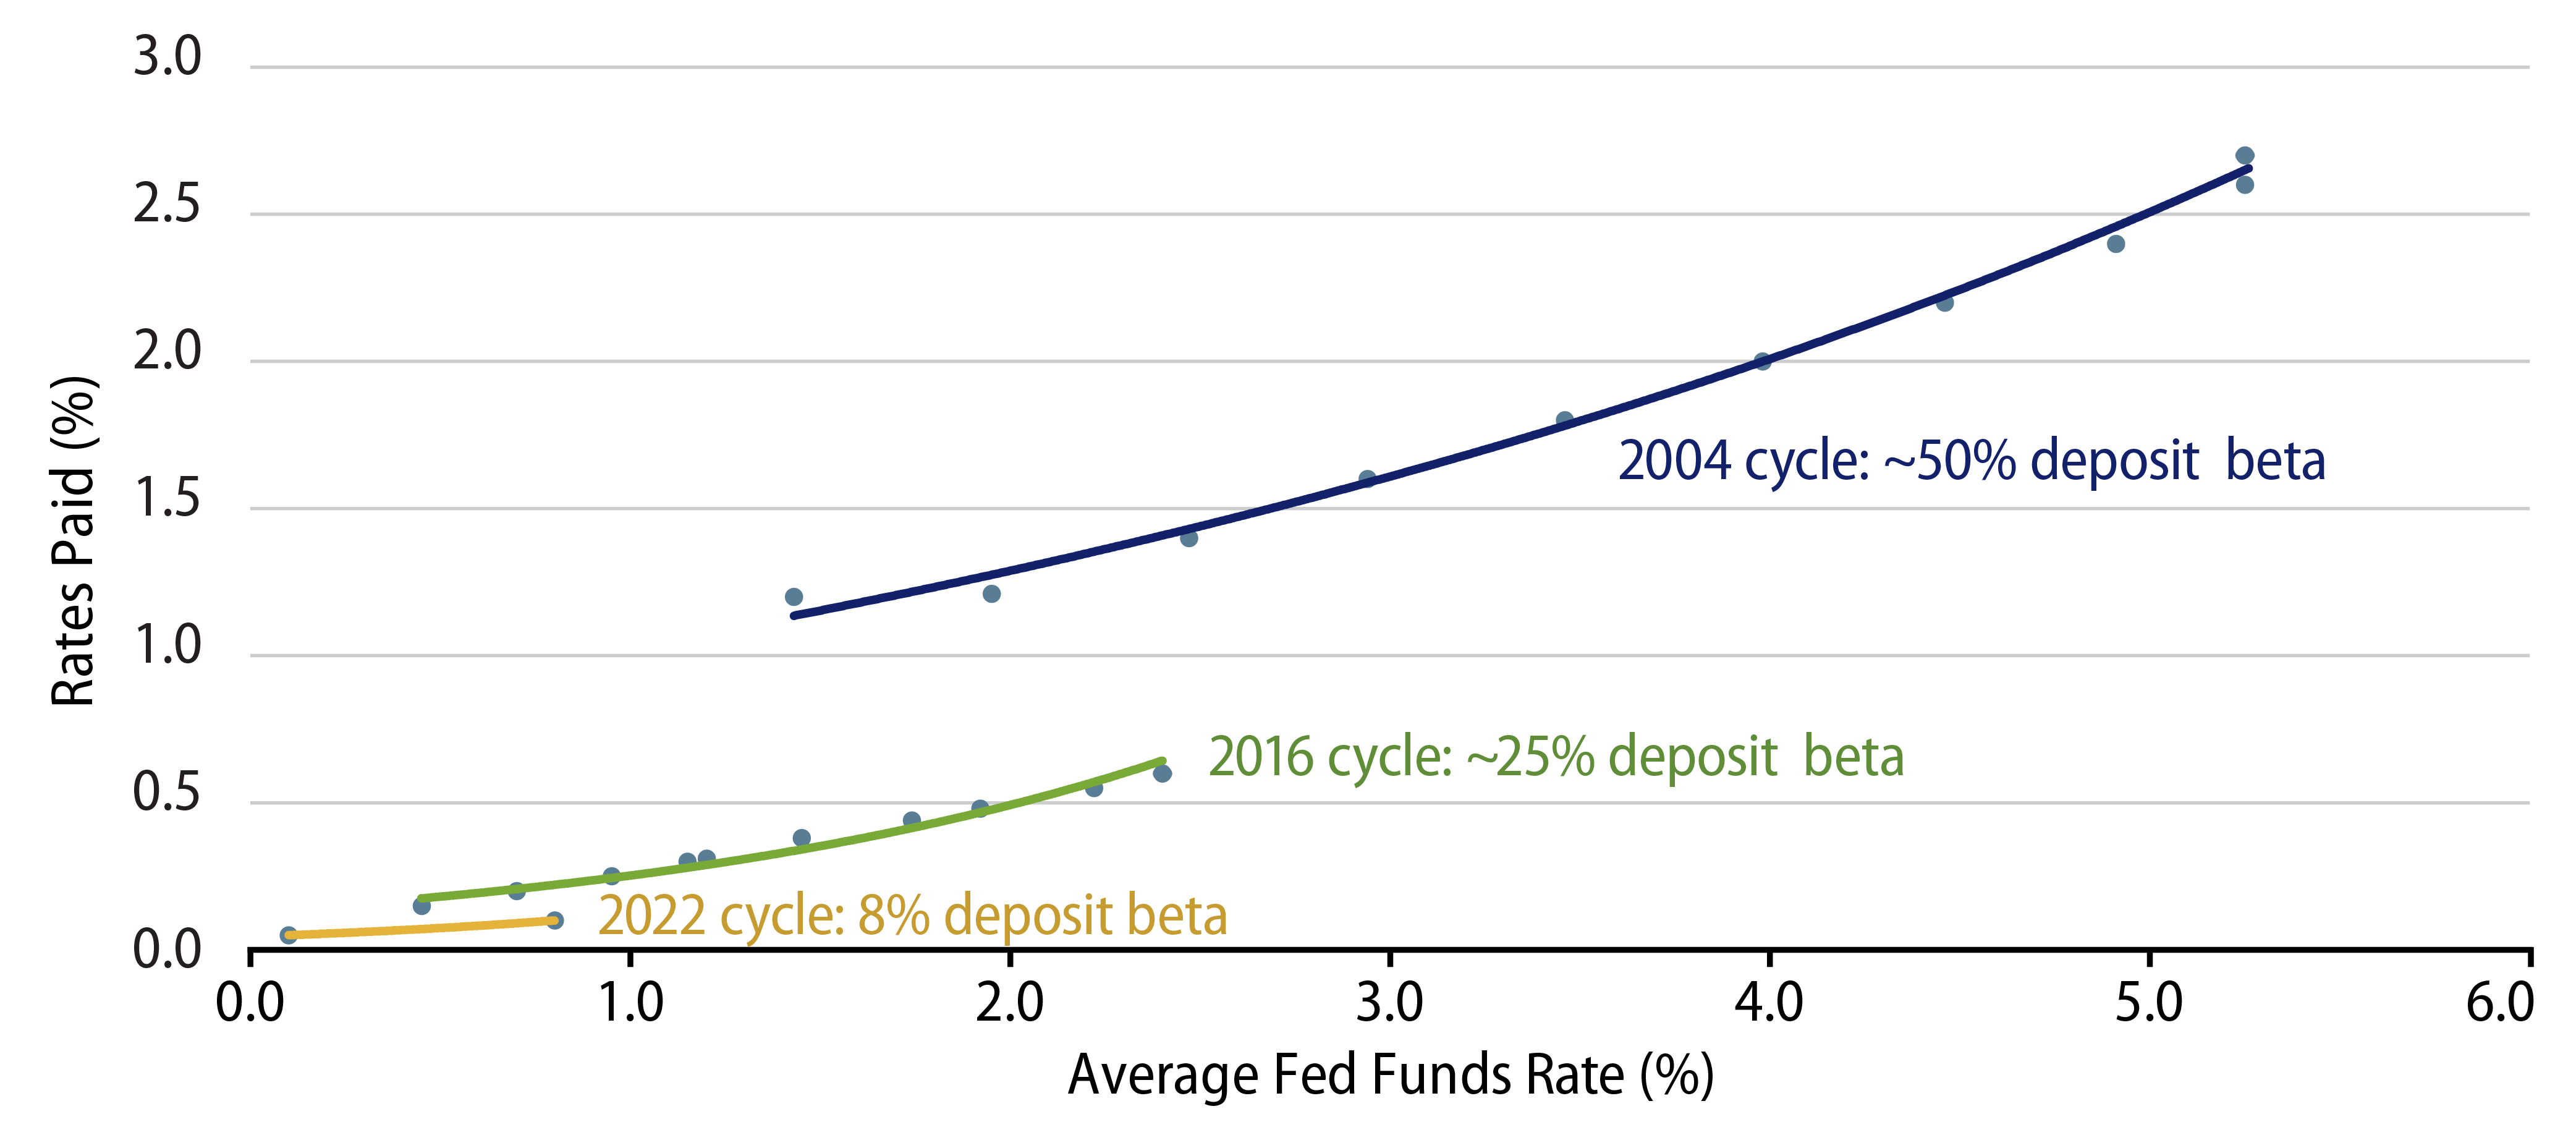 Comparing the 2004, 2016 and 2022 Tightening Cycles—Deposit Beta Curves